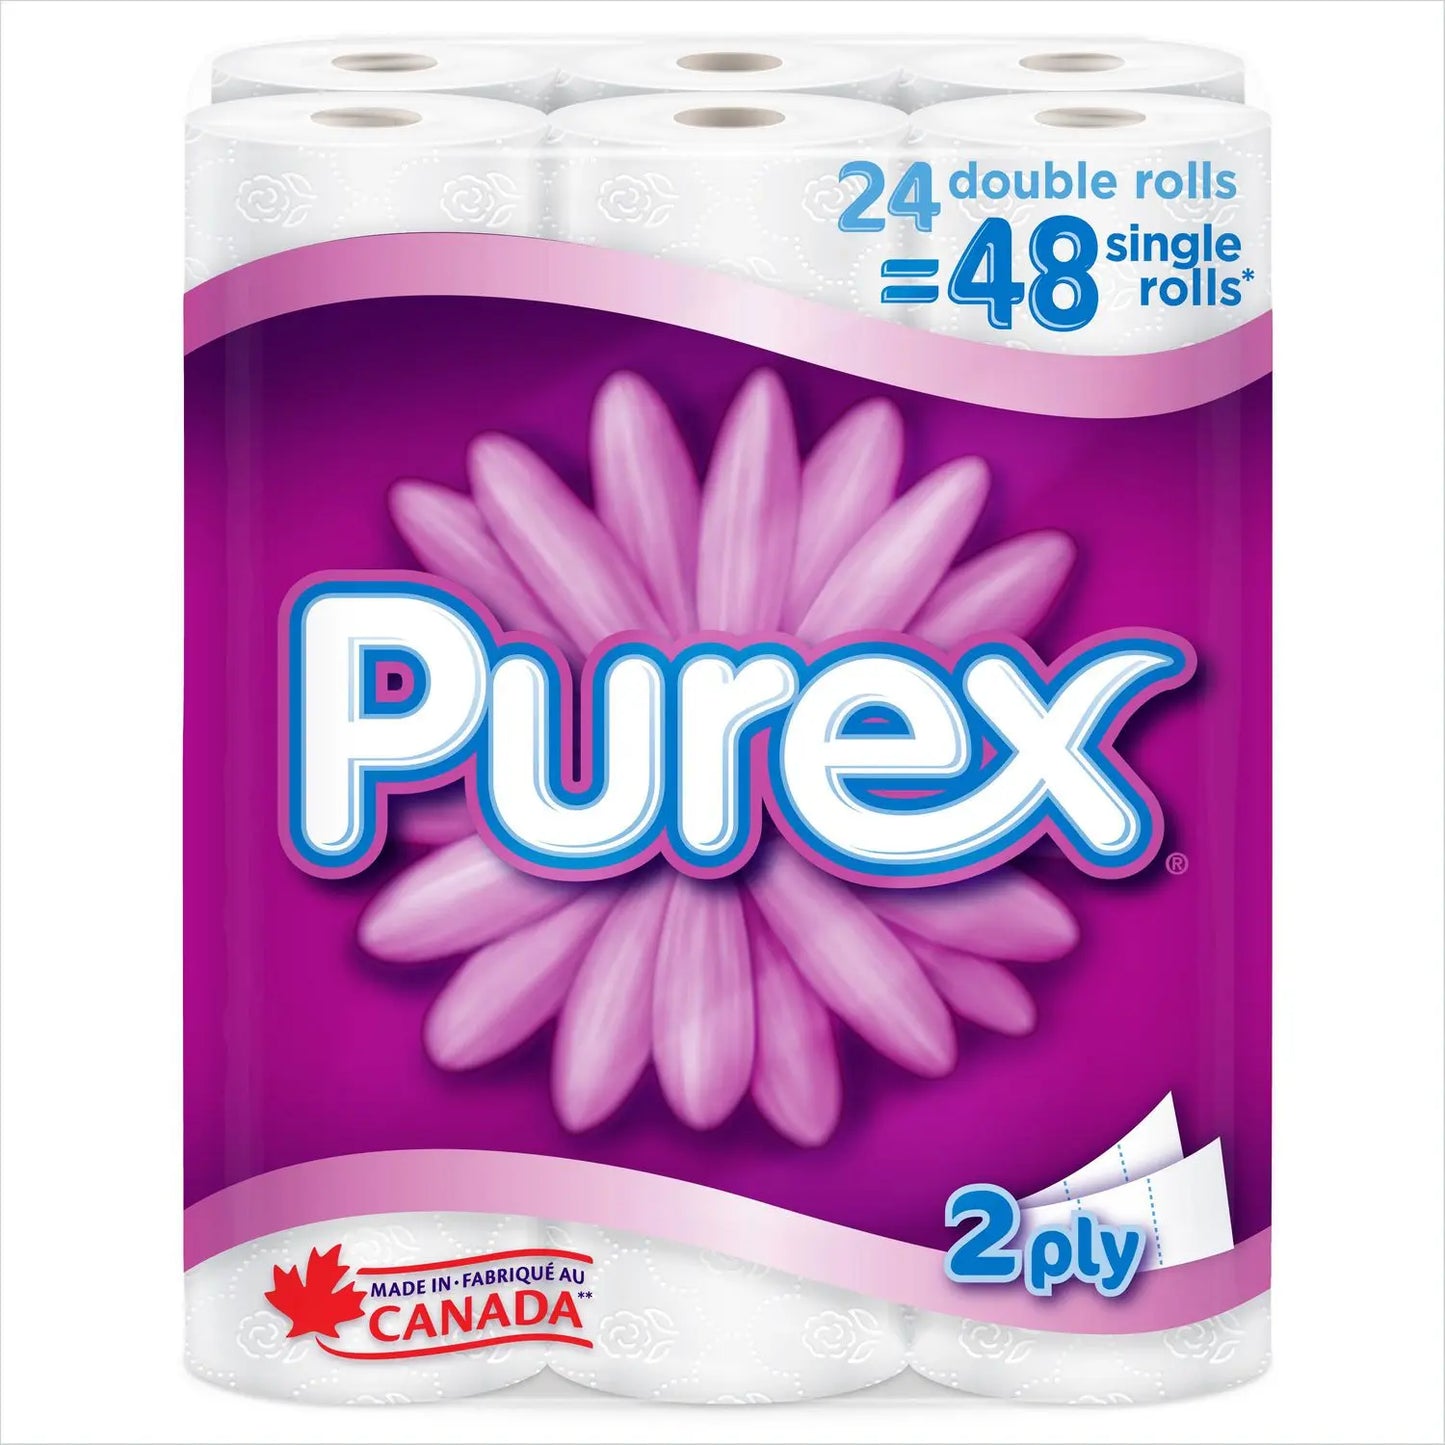 Purex Soft & Thick Toilet Paper, Hypoallergenic and Septic Safe, 24 Double Rolls = 48 Single Rolls Purex